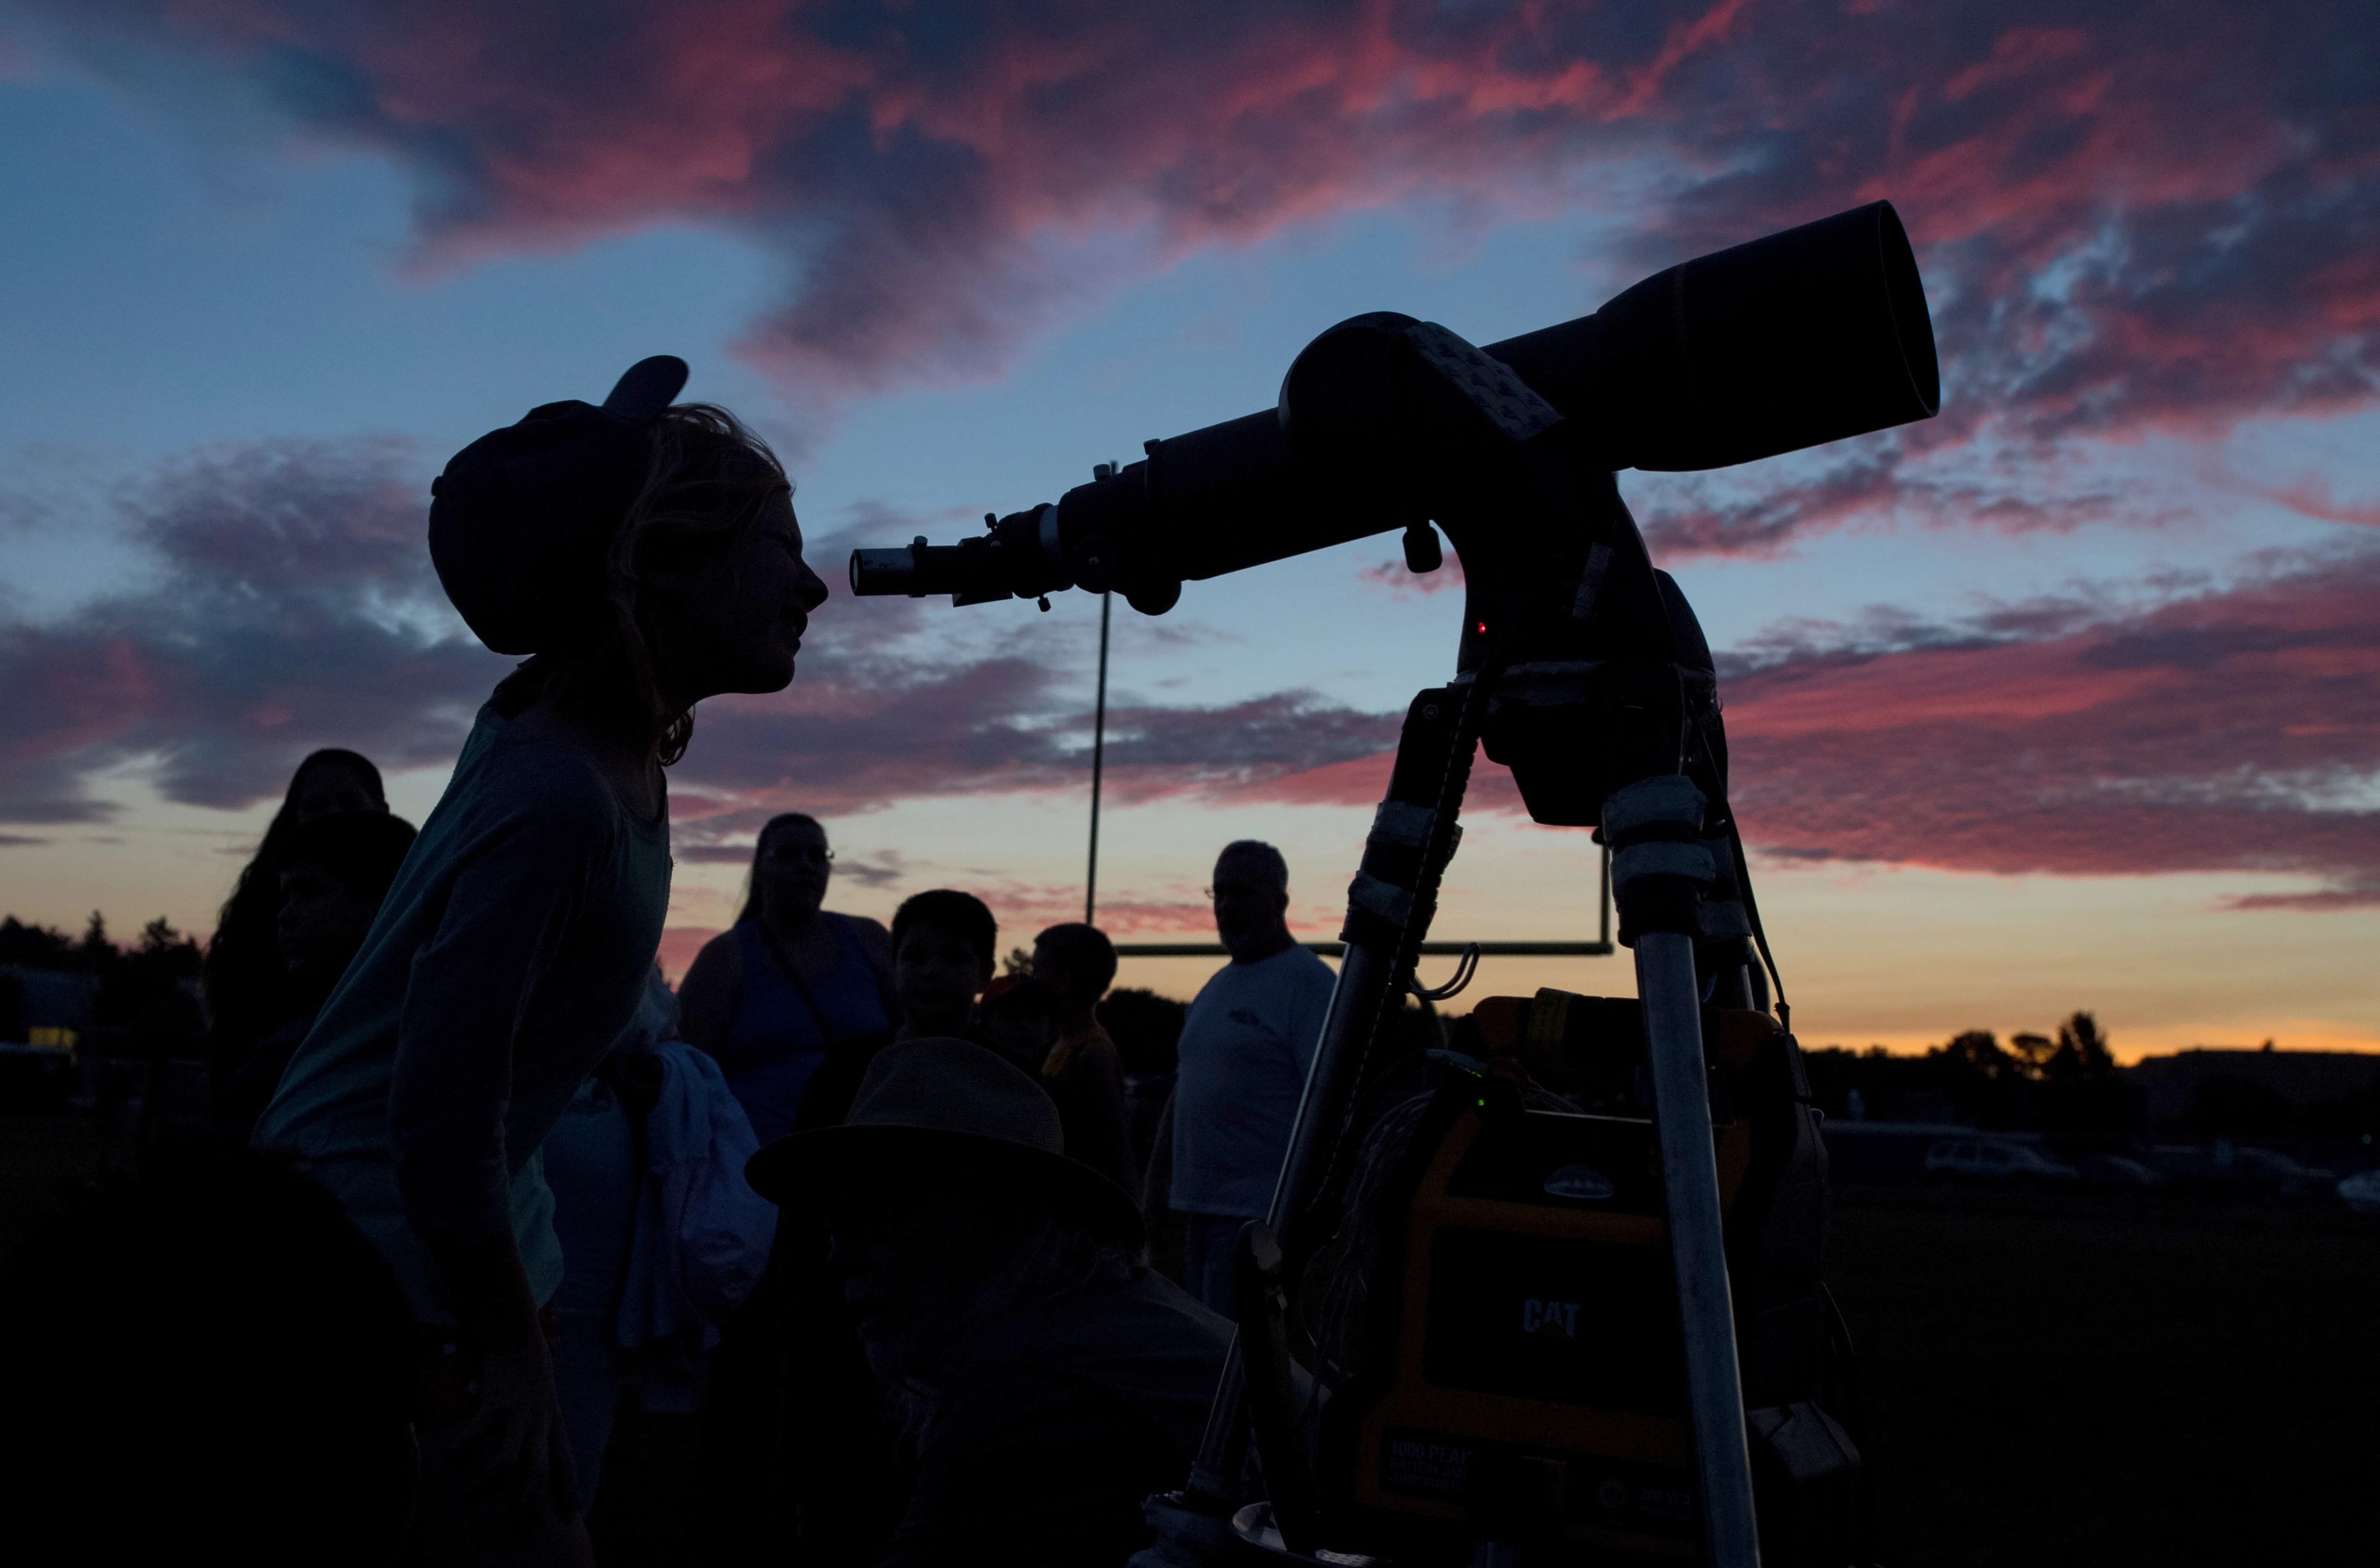 After sunset, with oranges and pinks in the darkening sky, a young person appears in silhouette, looking through a telescope, pointed toward right. A group of adults, also in silhouette, are visible in the background.